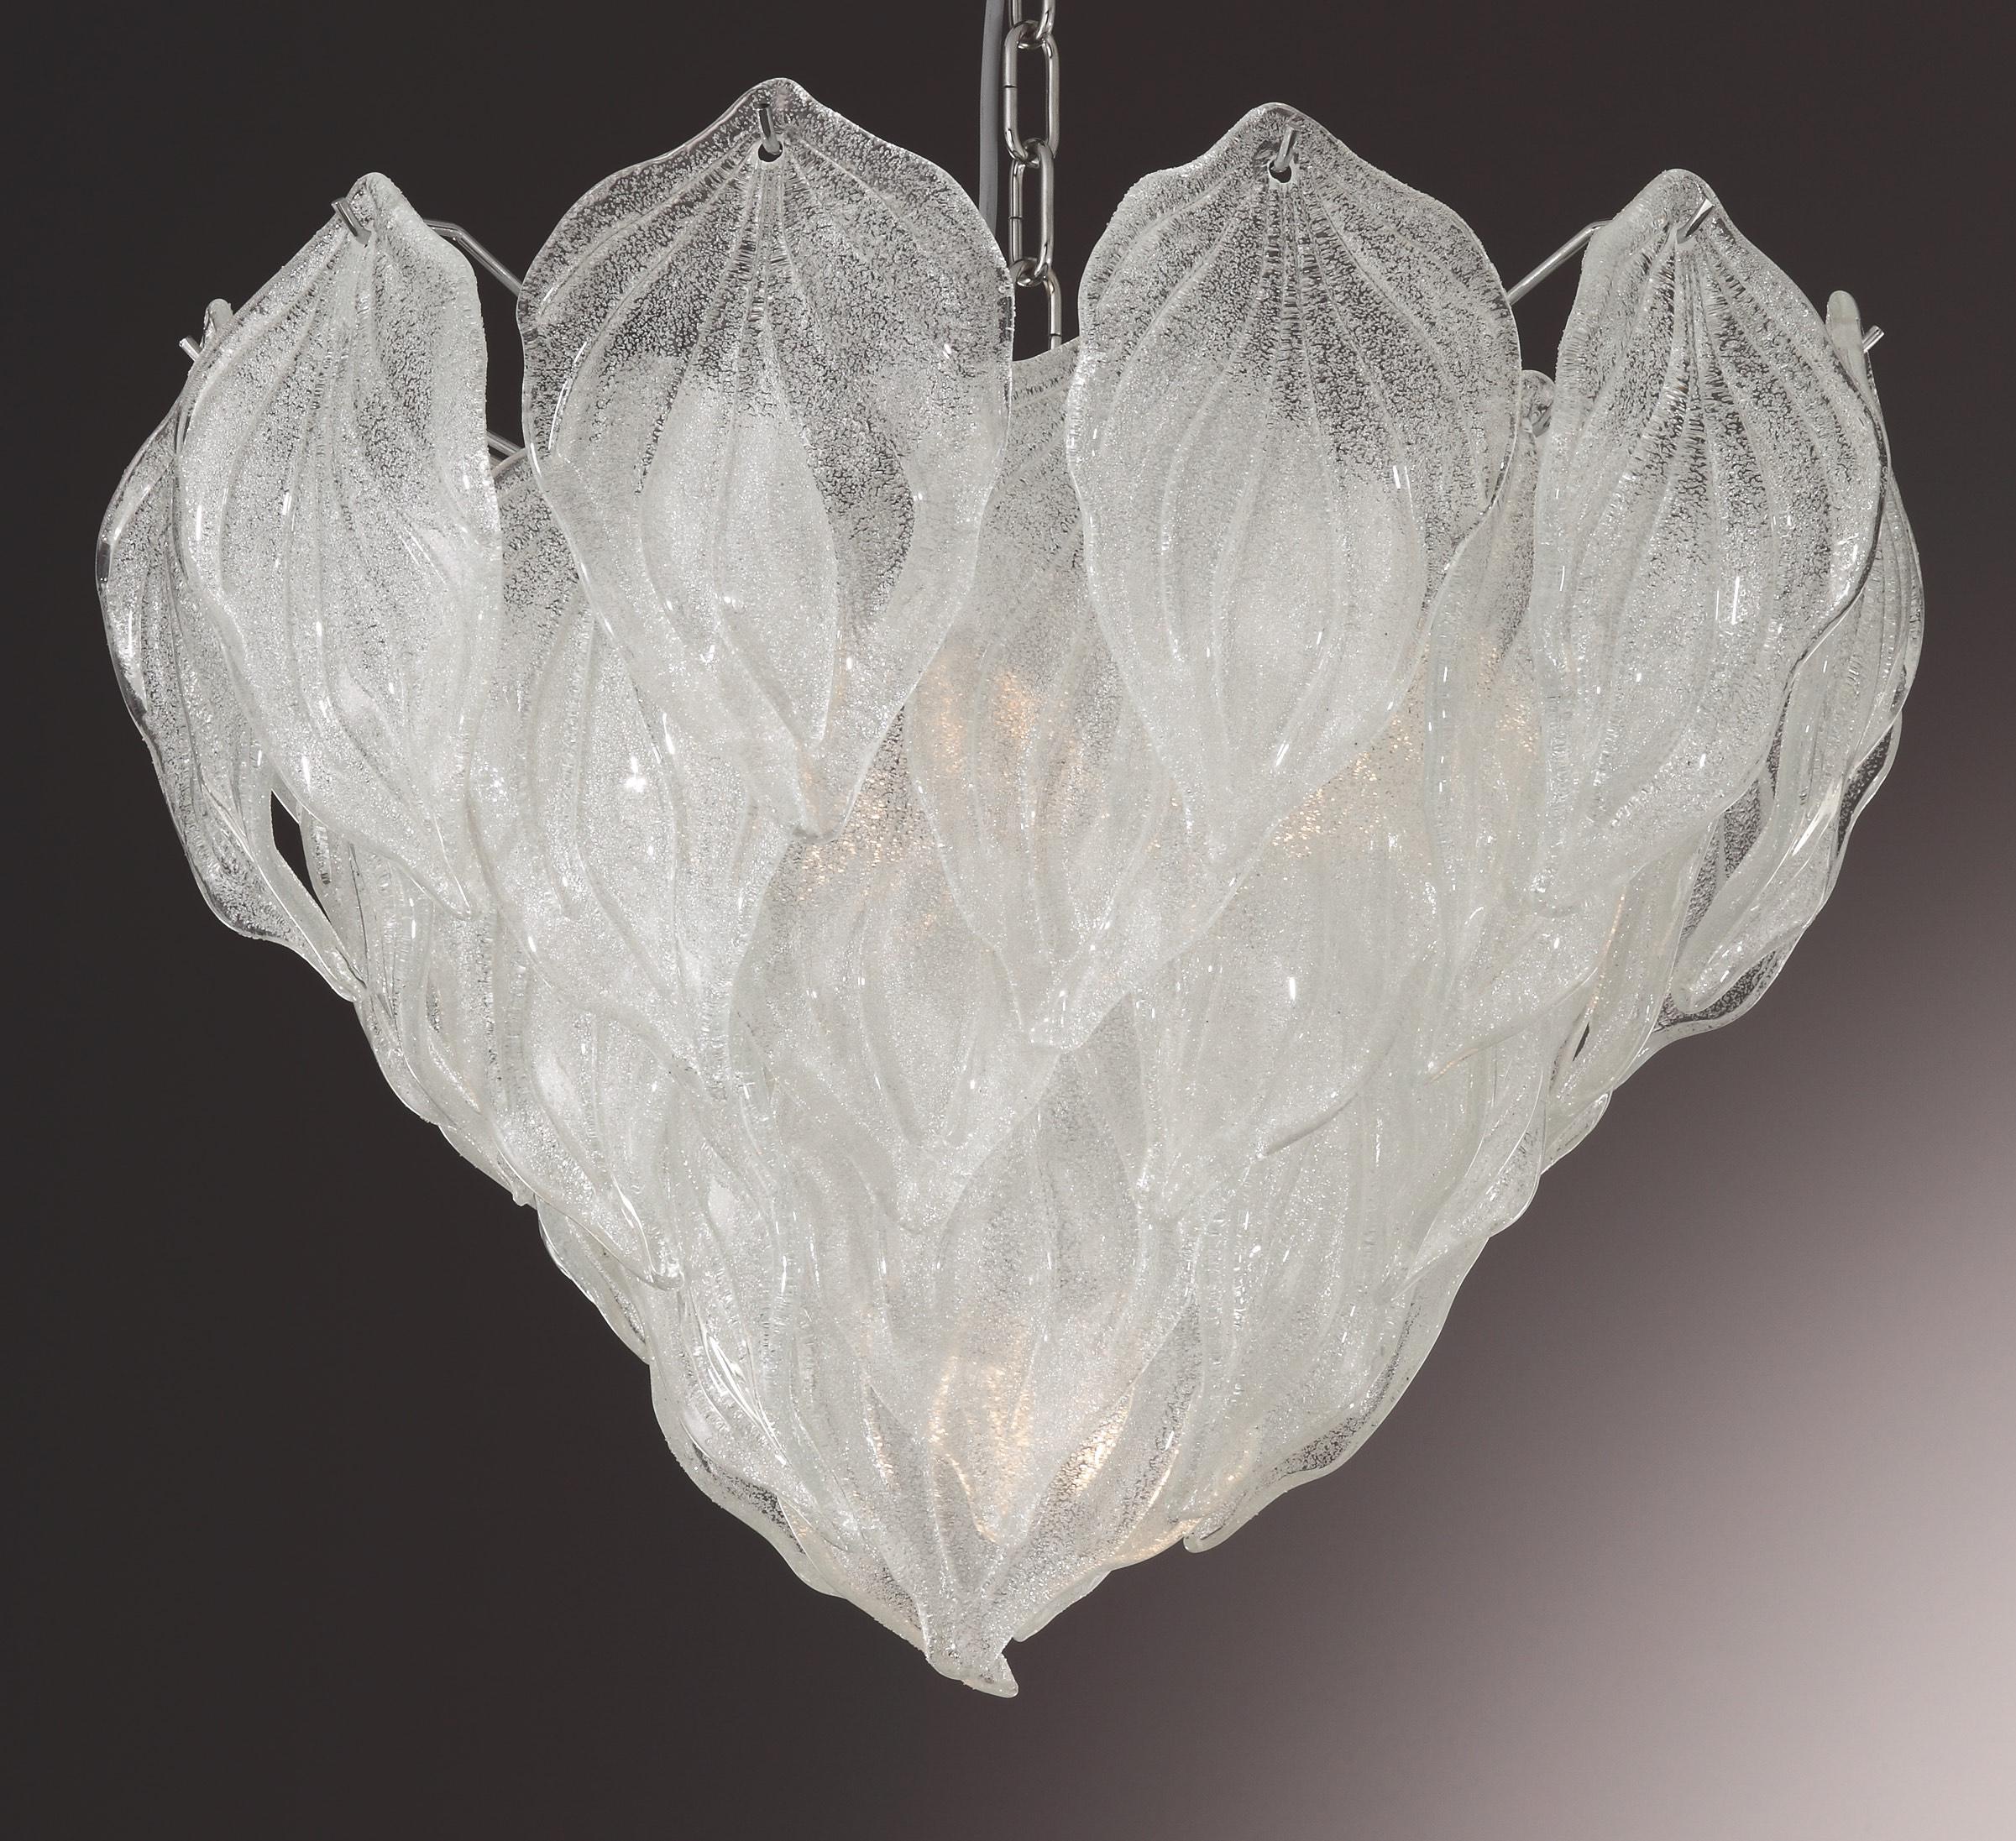 Italian chandelier shown with clear Murano glass leaves hand blown in Graniglia technique to produce granular textured effect, mounted on chrome finish frame / Designed by Fabio Bergomi for Fabio Ltd, inspired by Mazzega / Made in Italy
5 lights /